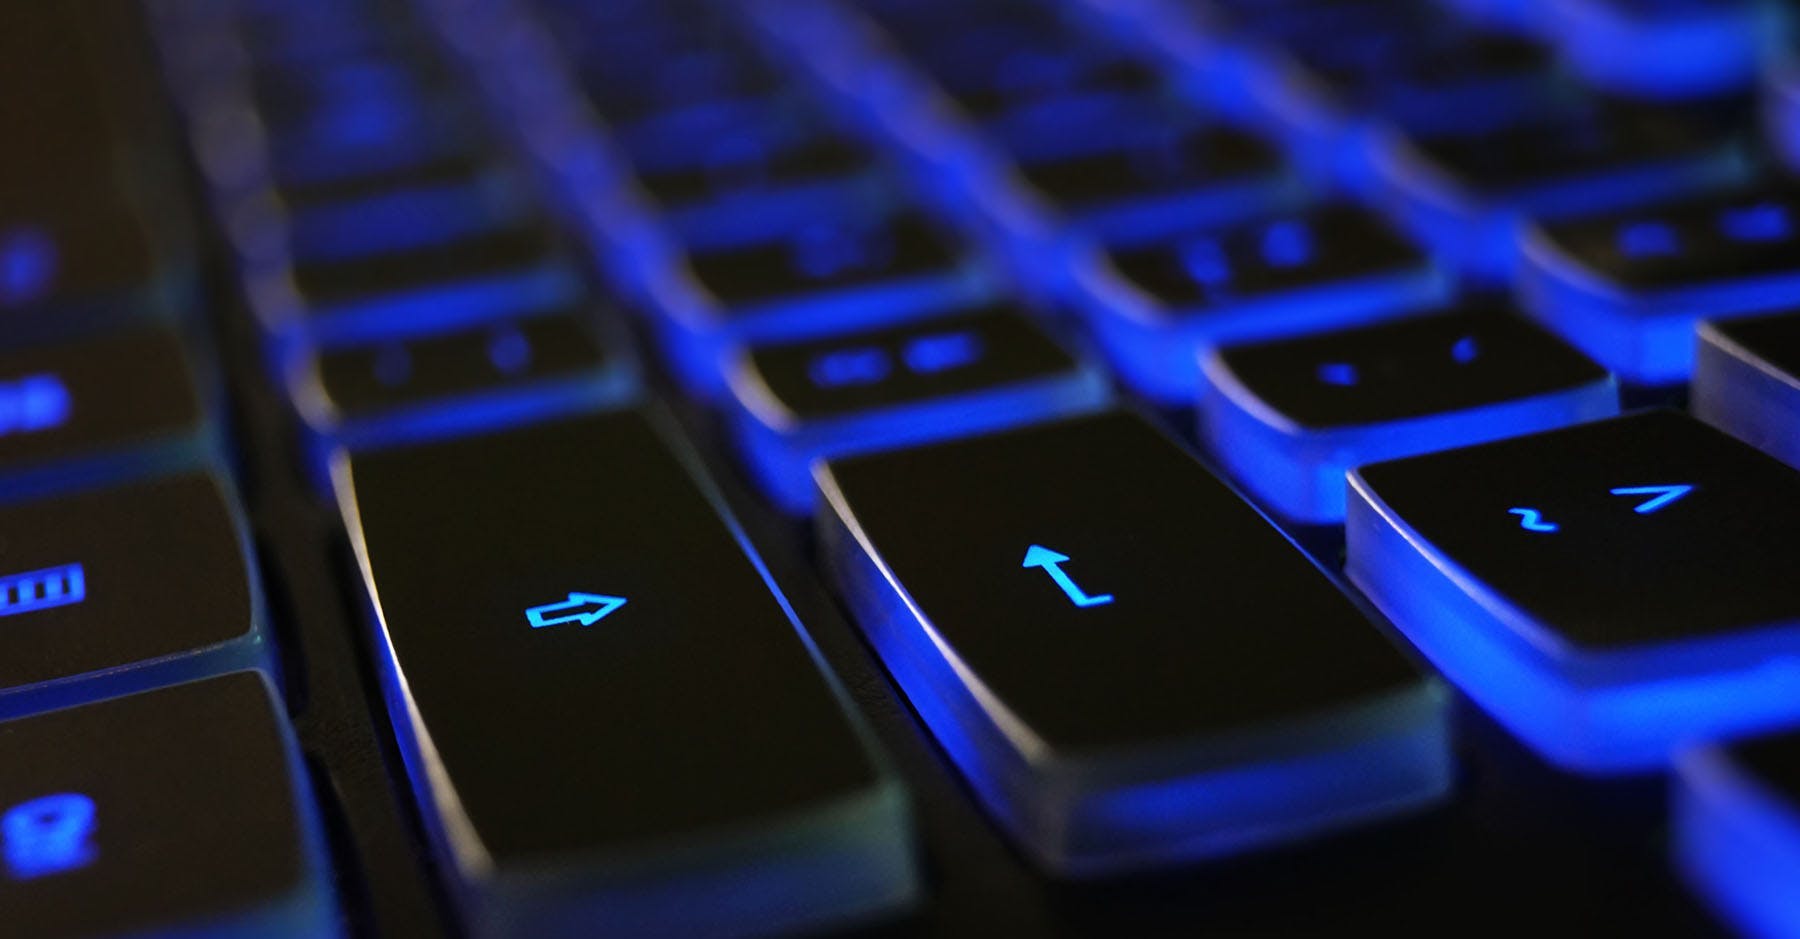 keyboard with blue backlight